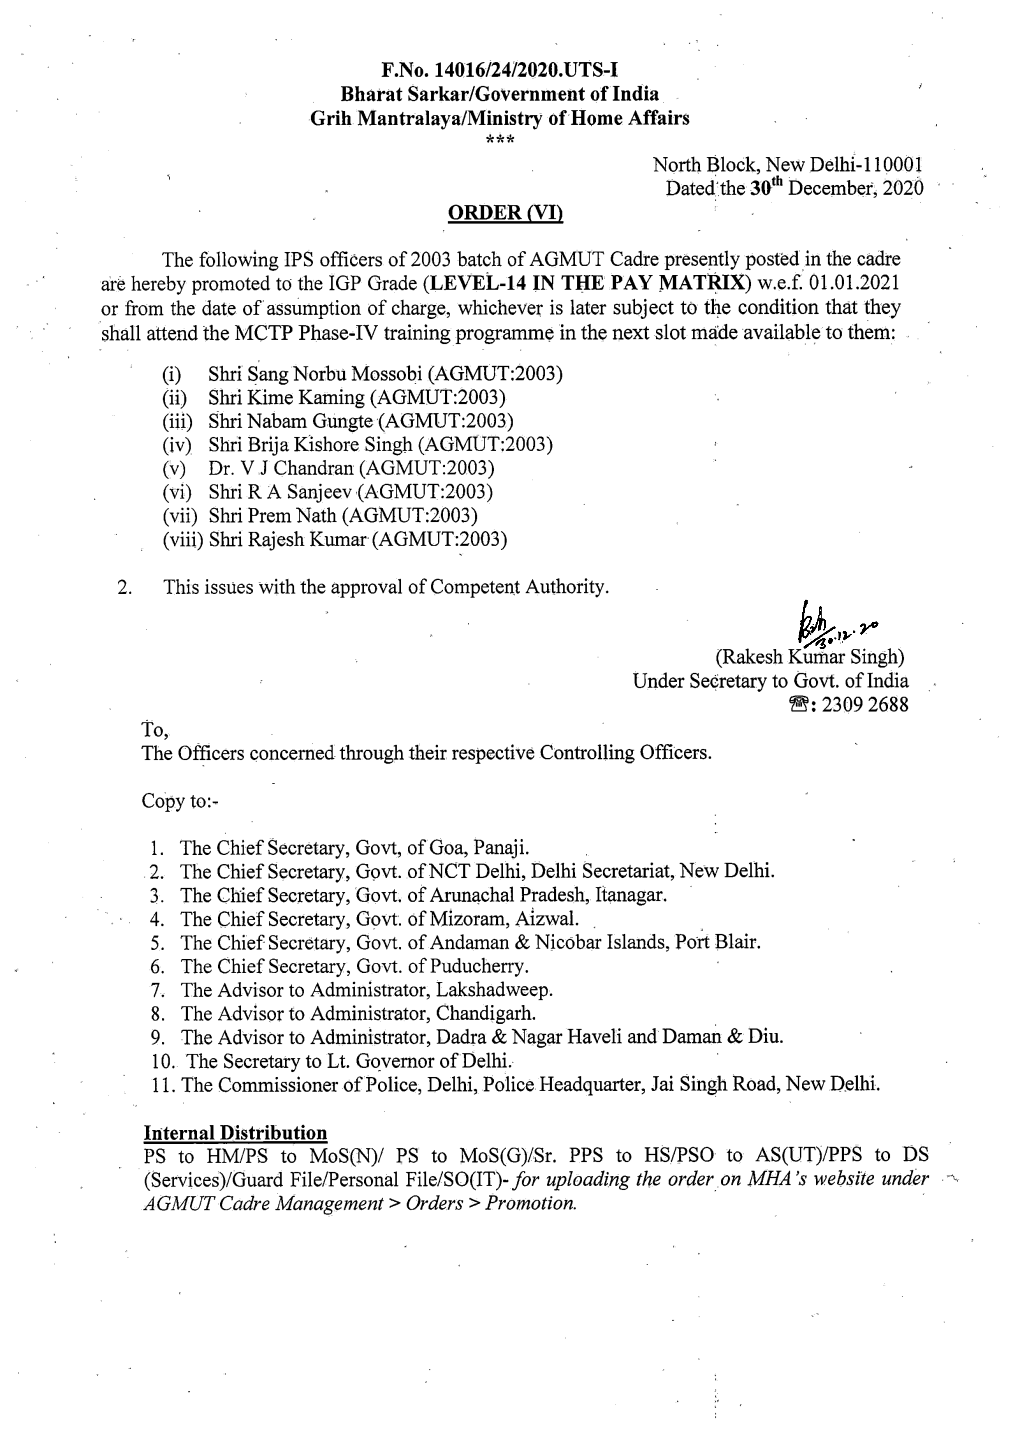 Promotion Order of IPS Officers of AGMUT Cadre